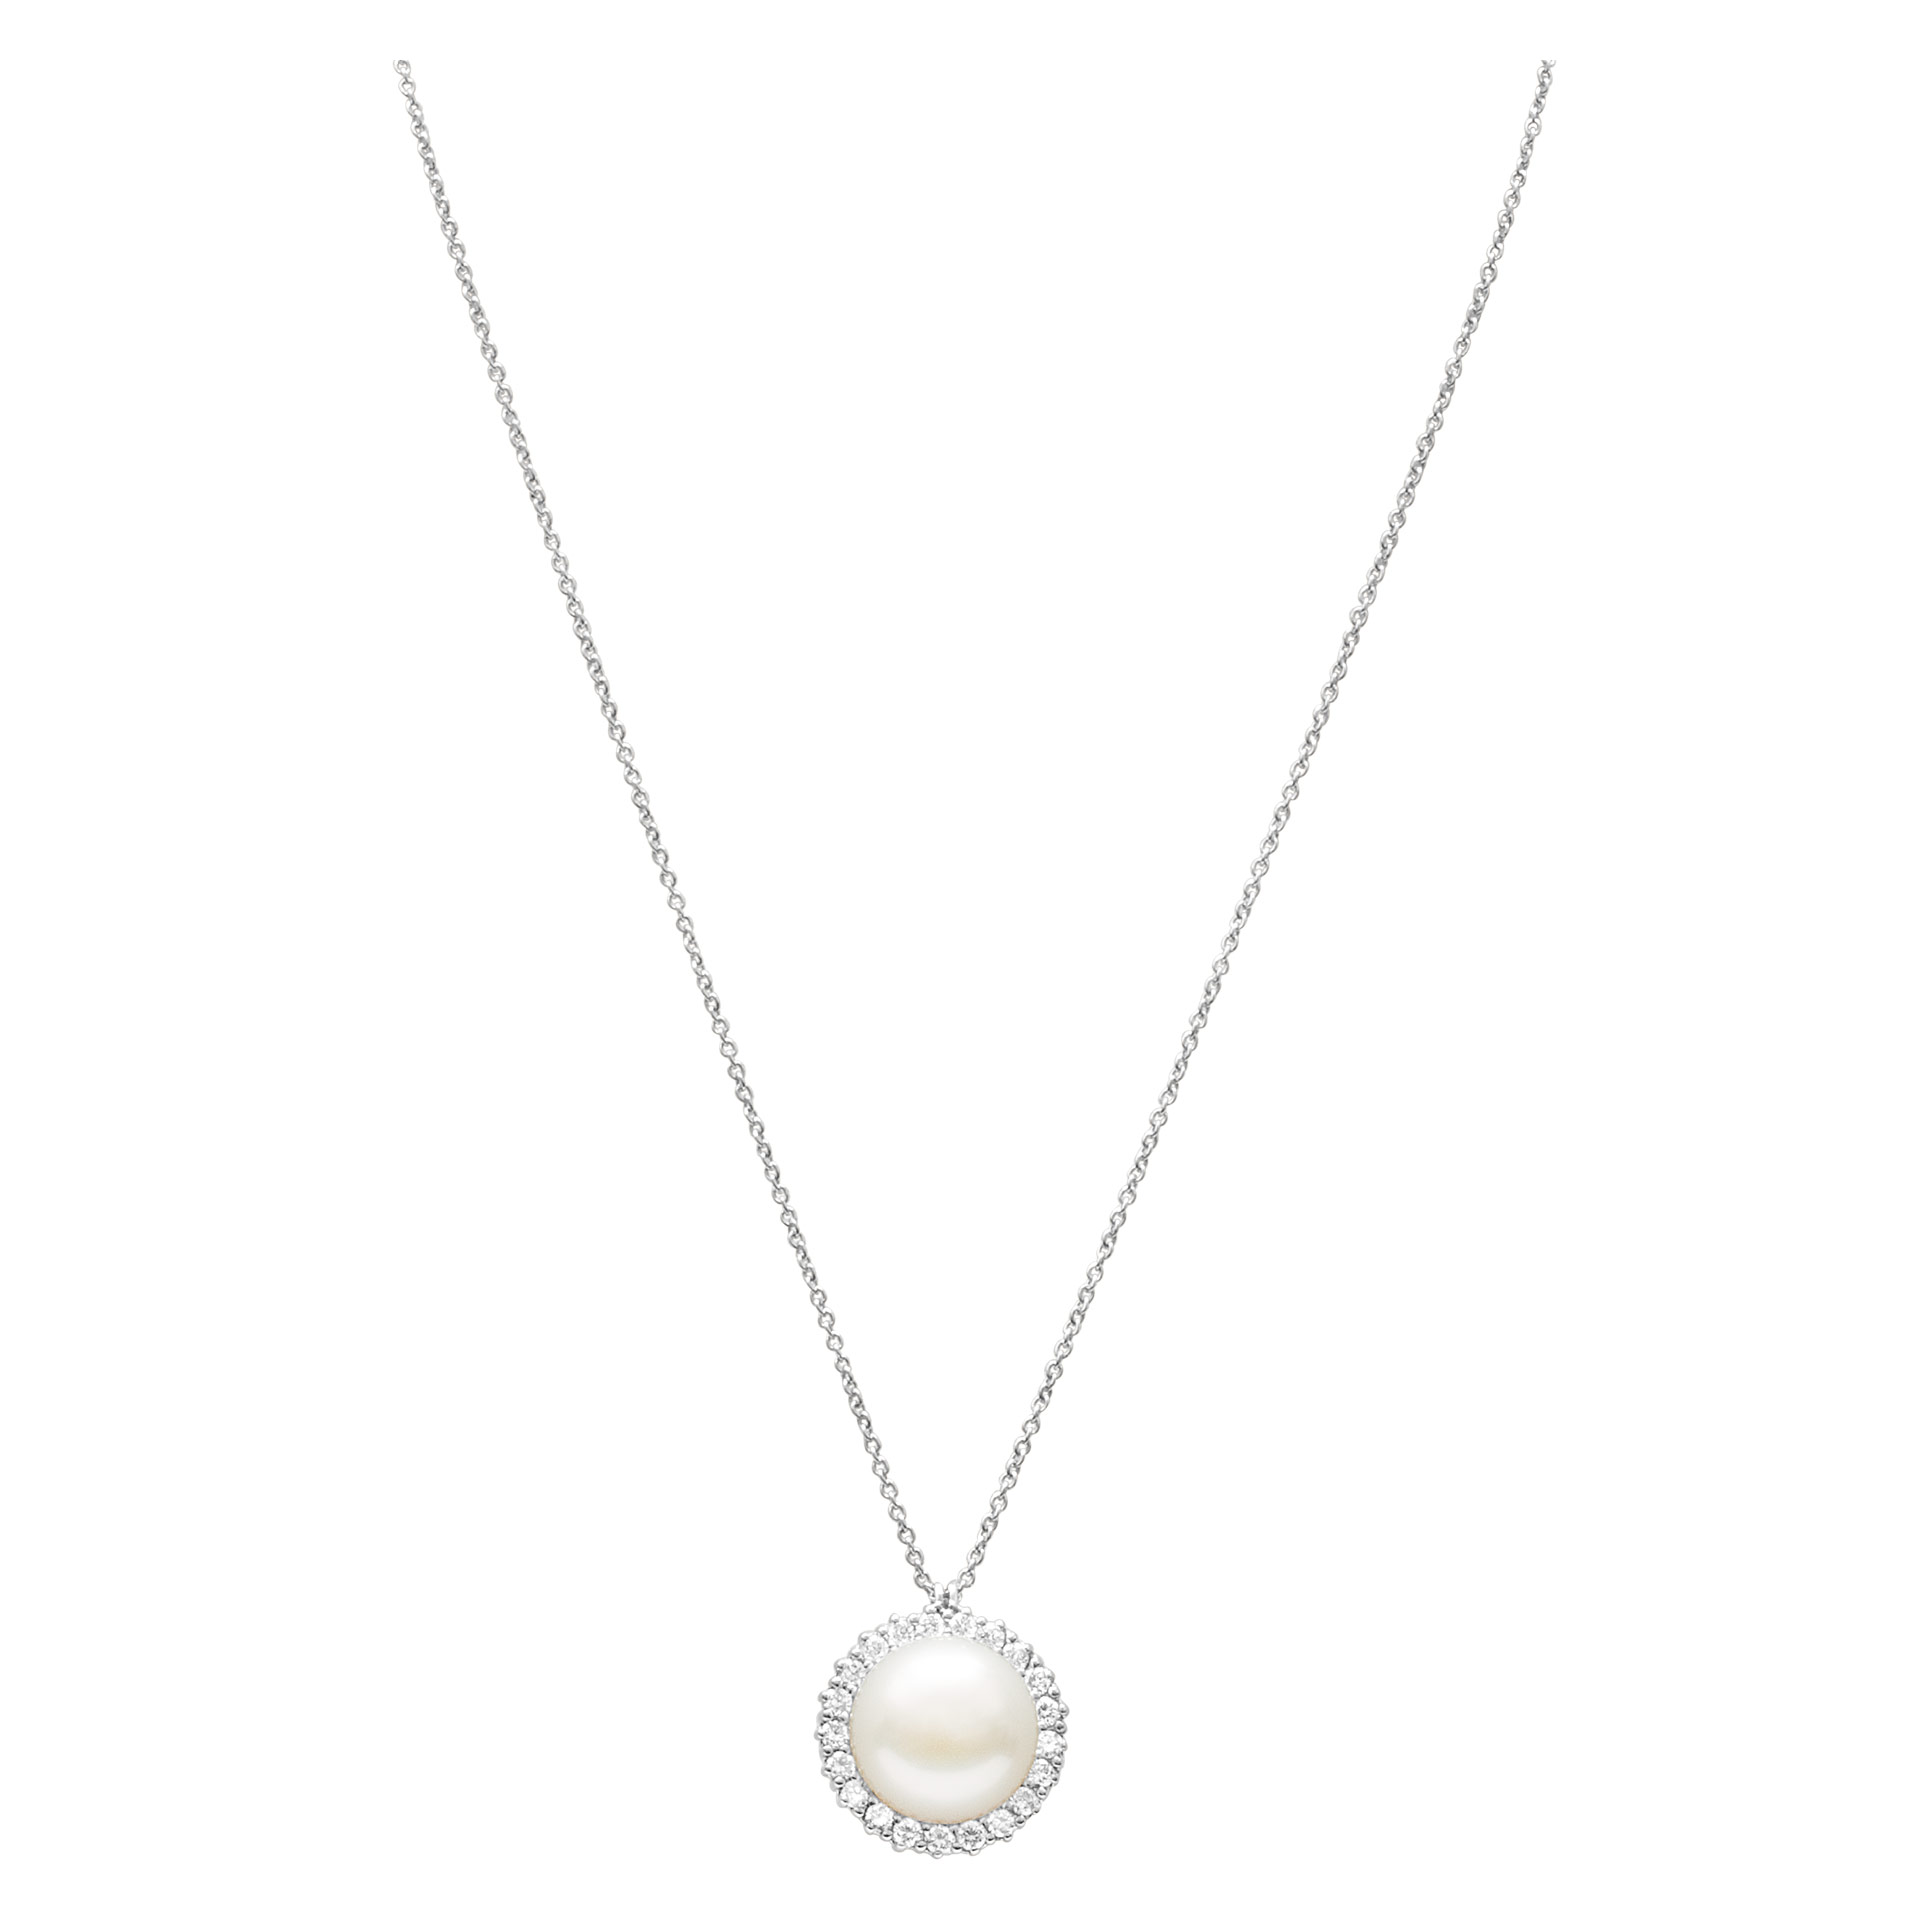 South sea pearl pendant necklace with diamonds in 18k white gold chain image 2